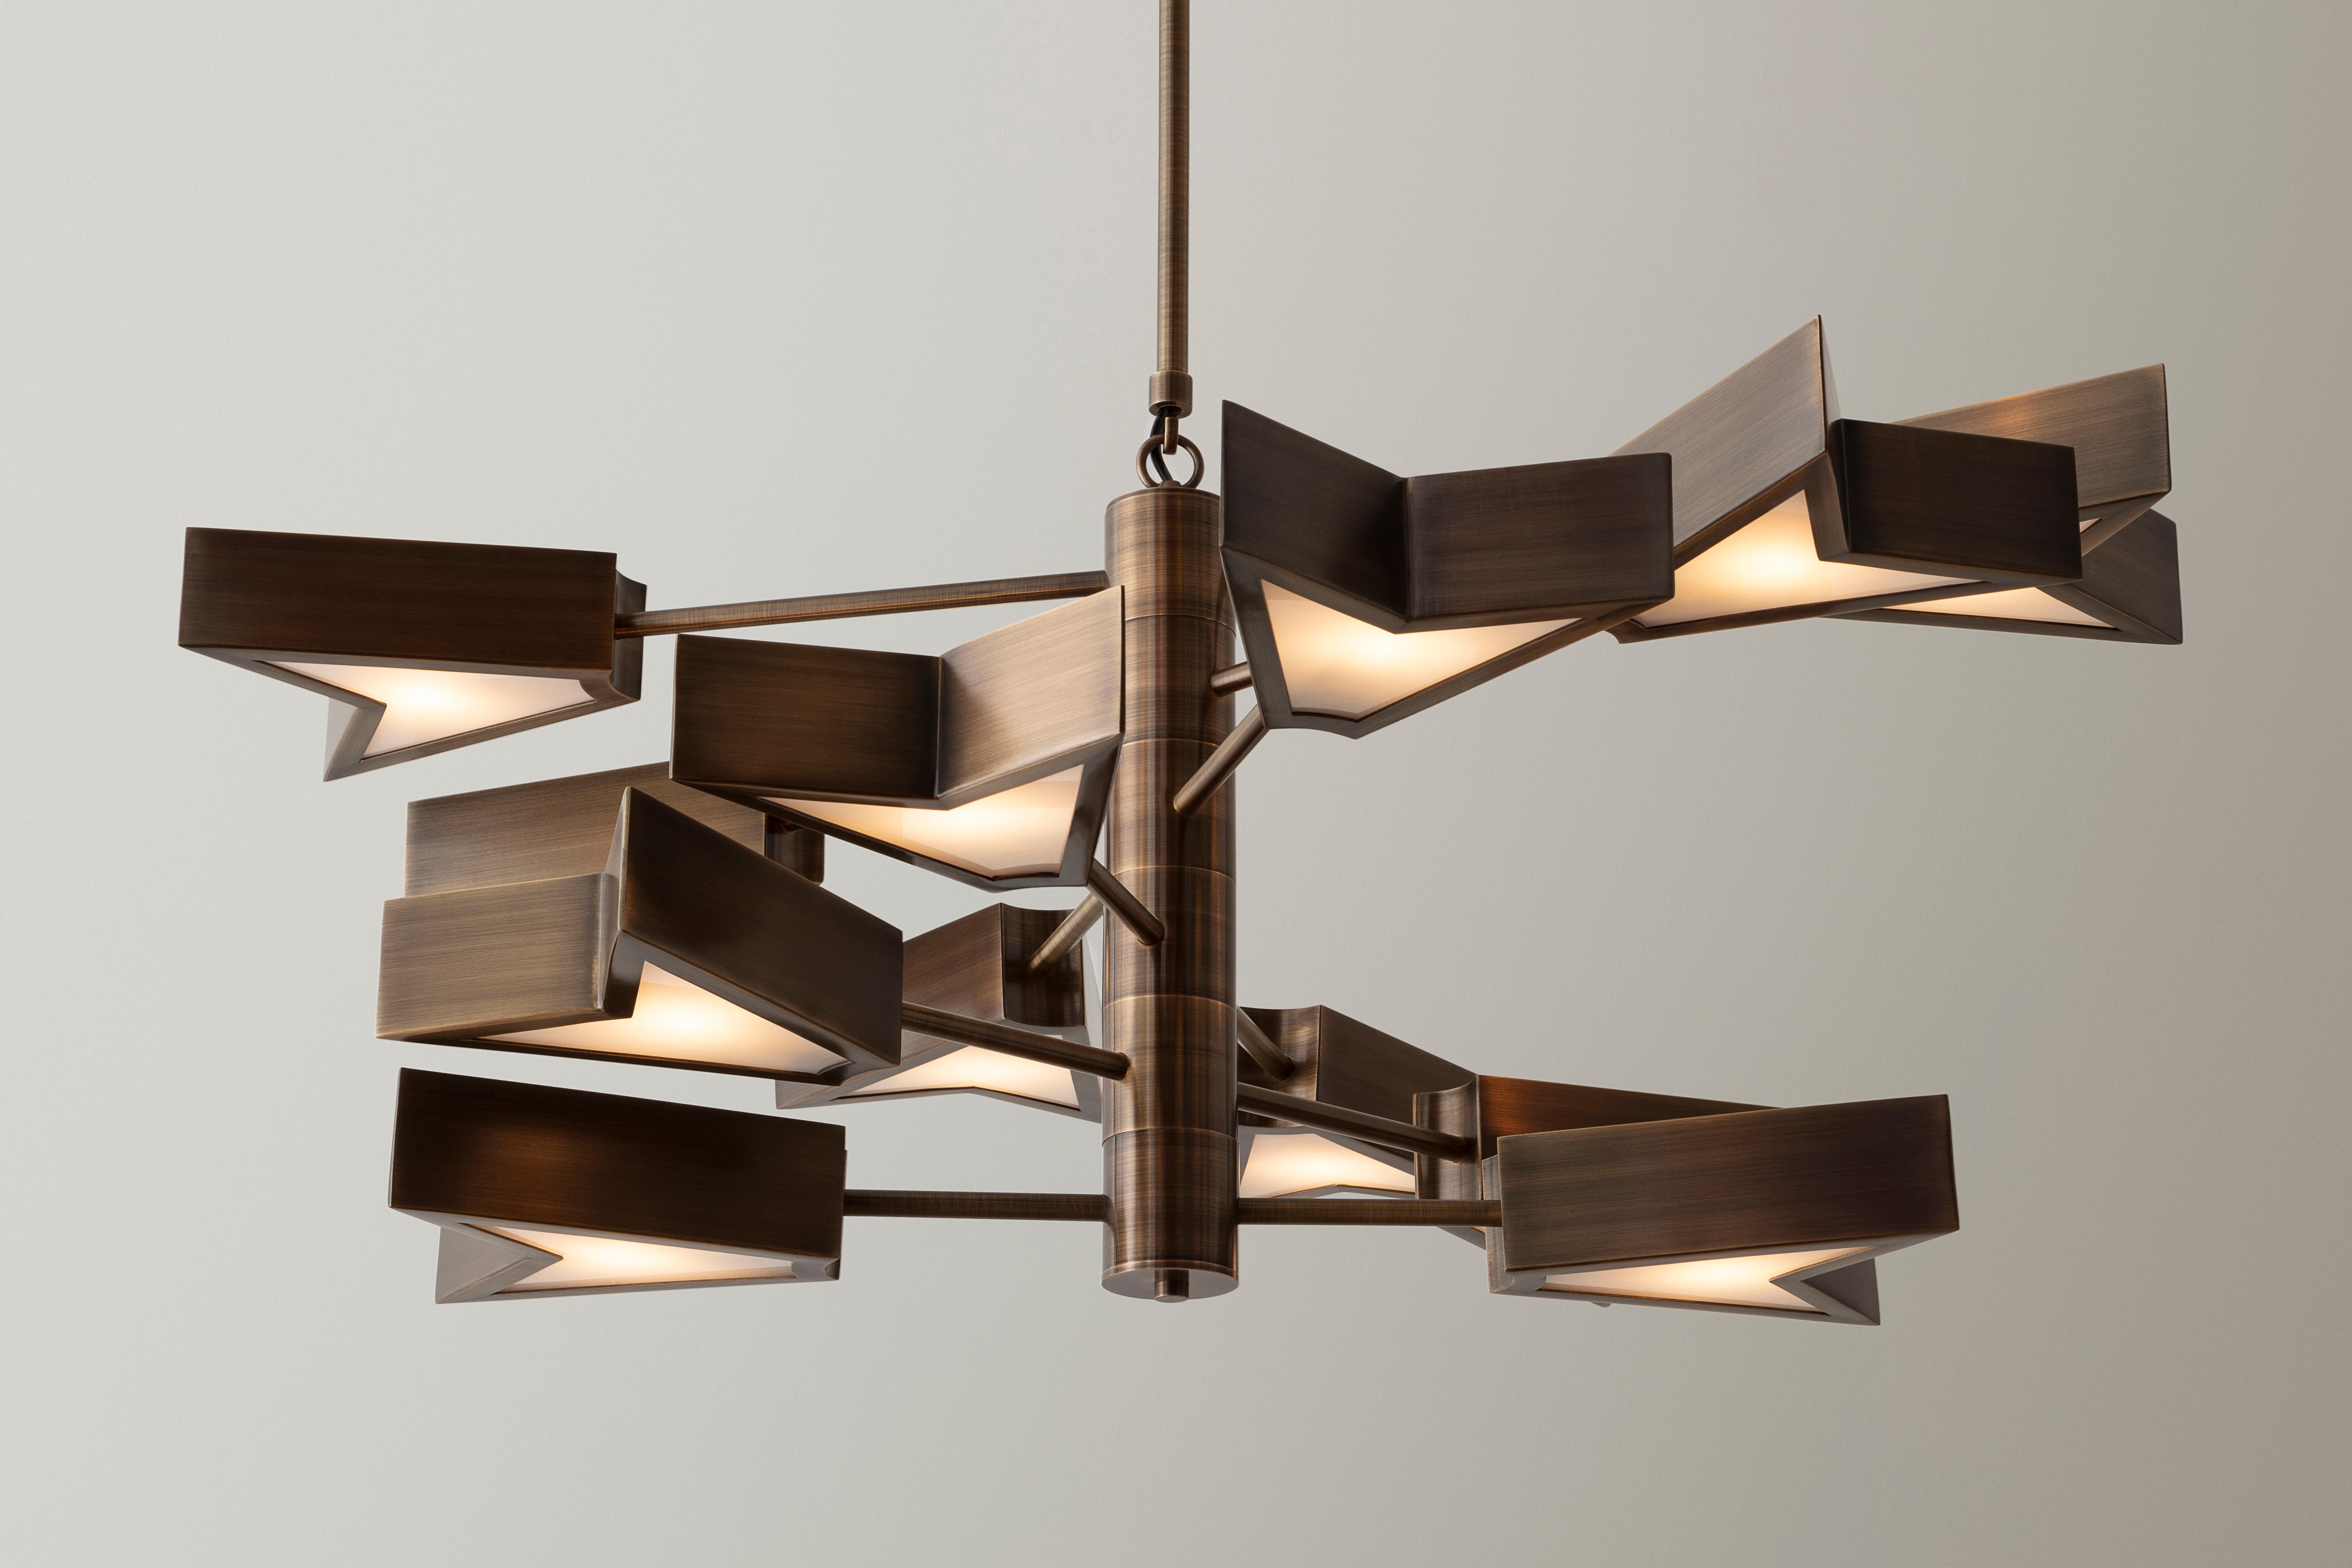 50% Deposit

The Osiris chandelier 6.12 is a modular lighting fixture made from hand formed brass components. Using a small kit of parts, many unique designs can be fabricated. The brass fixture body is offered in six artisanal finishes. Soft